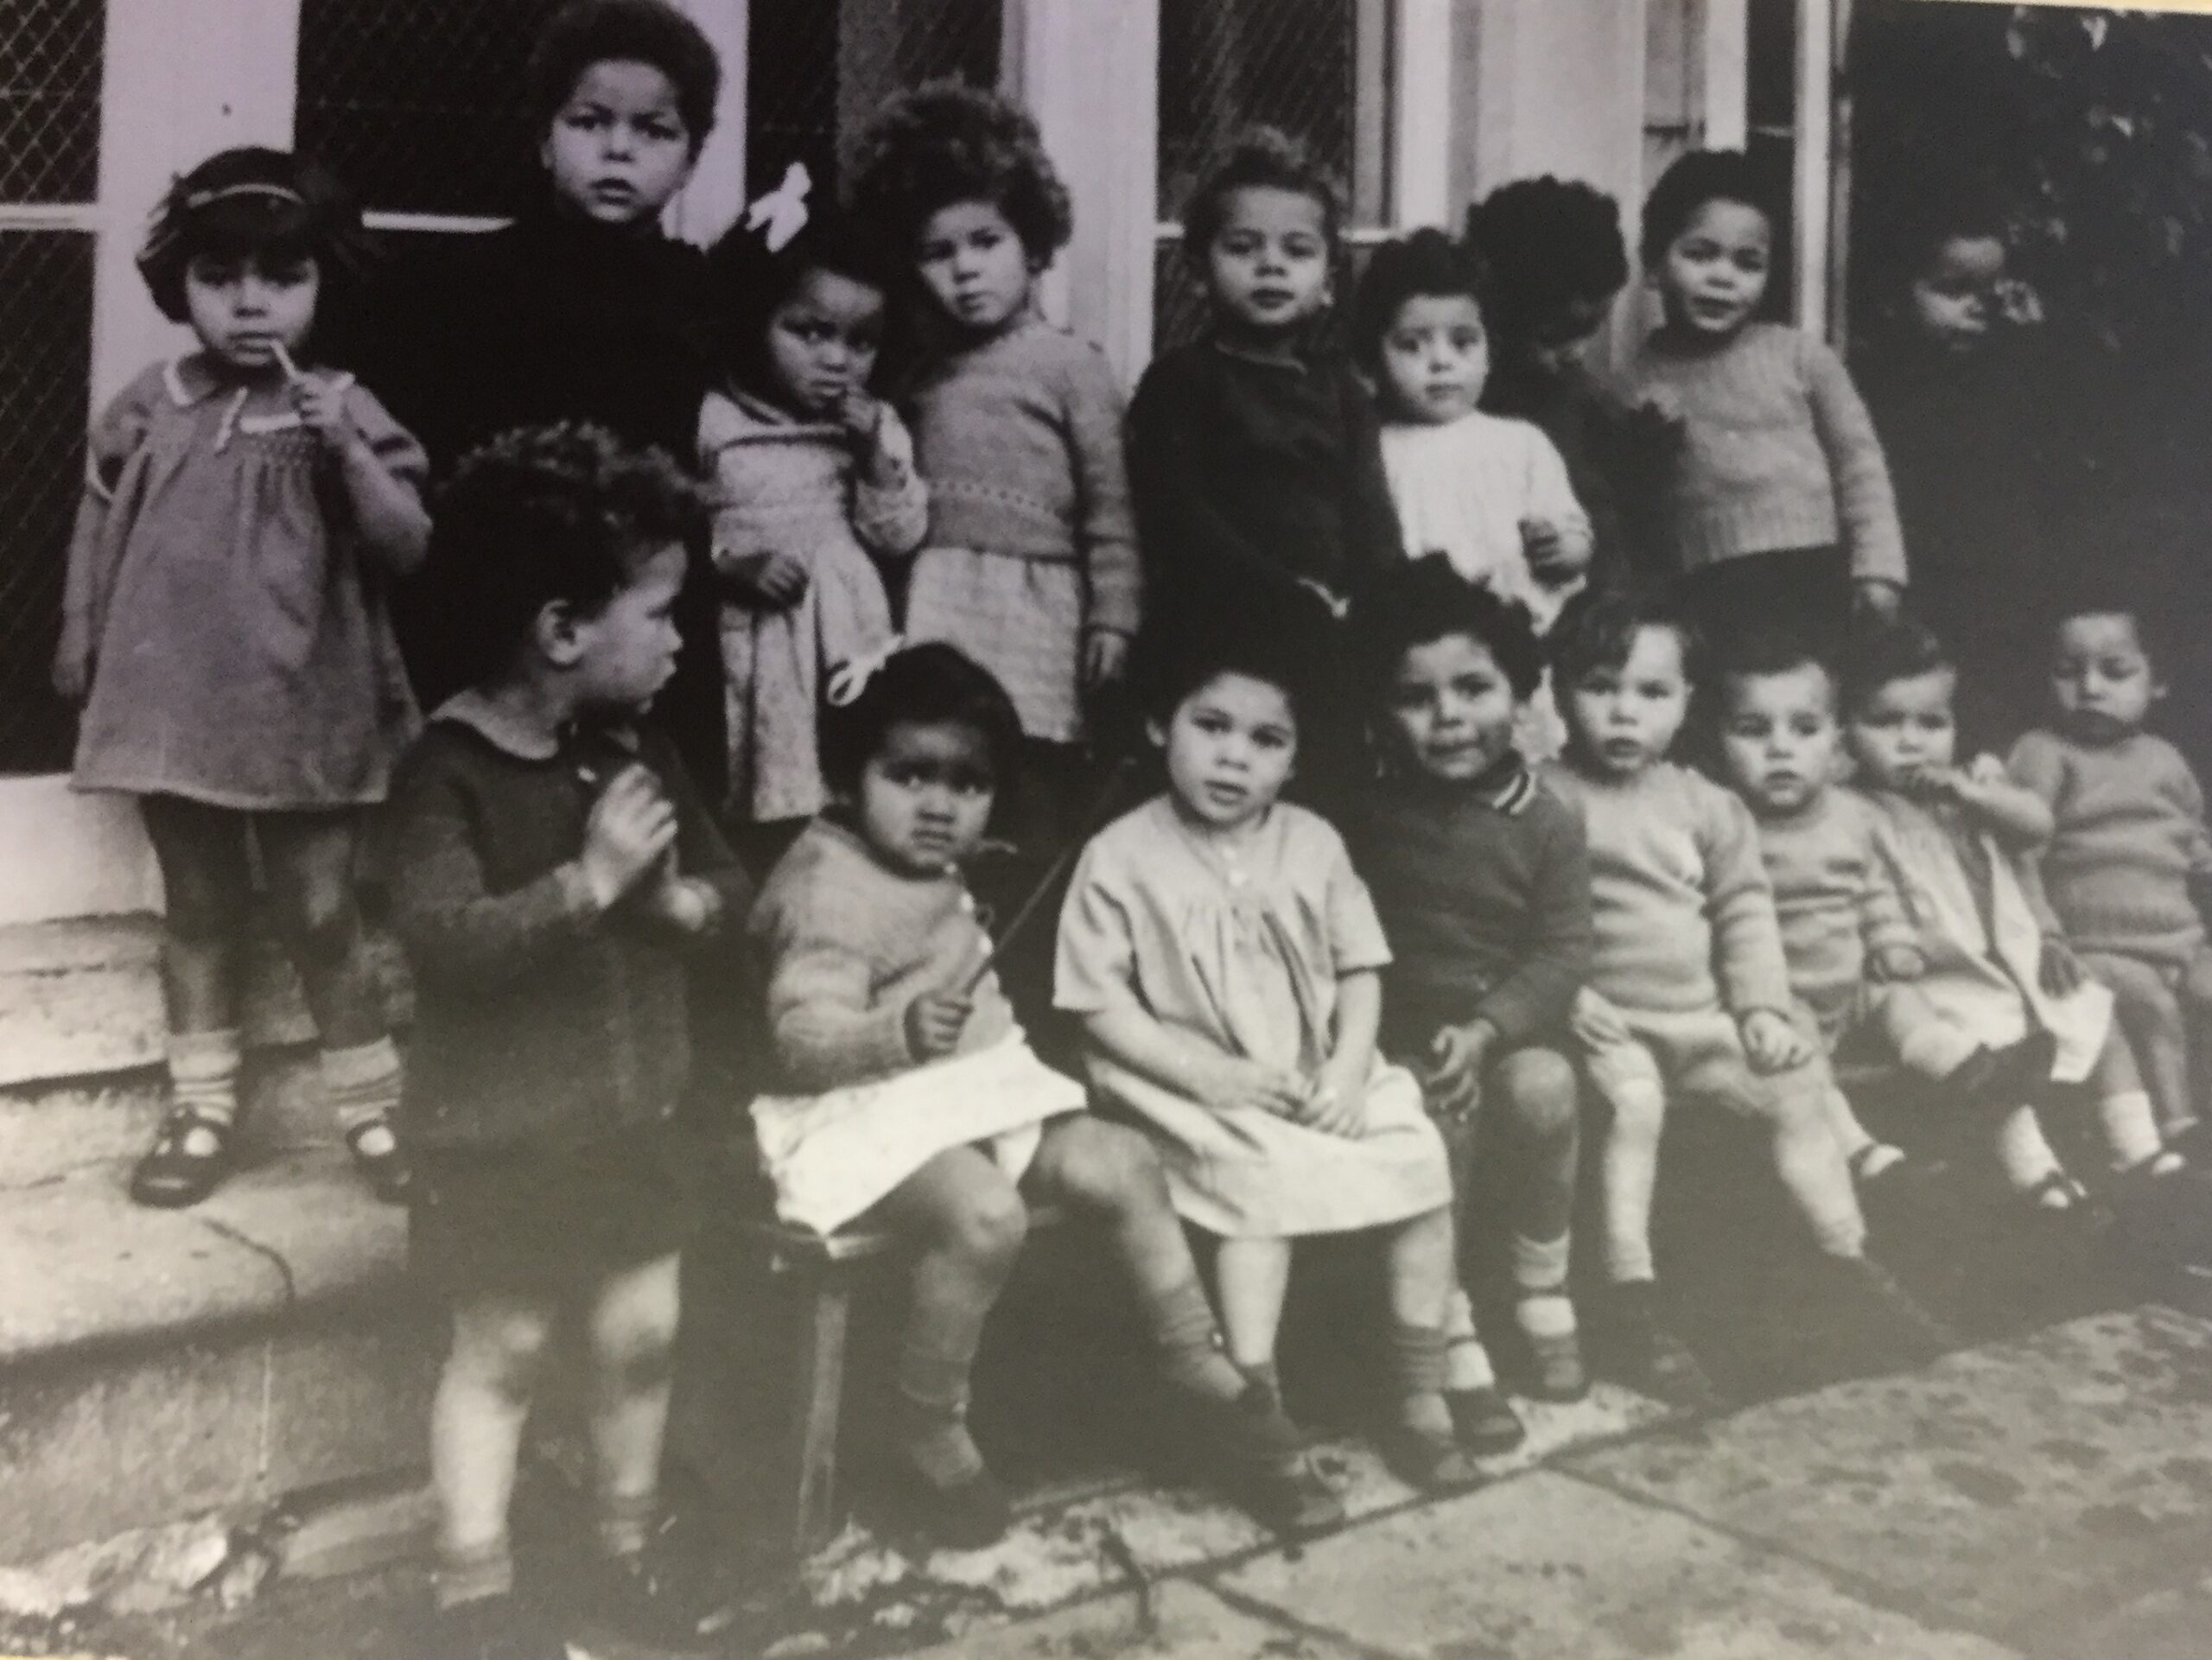 Black and white photograph of around 20 mixed race children standing outsdie a building in the 1940s.